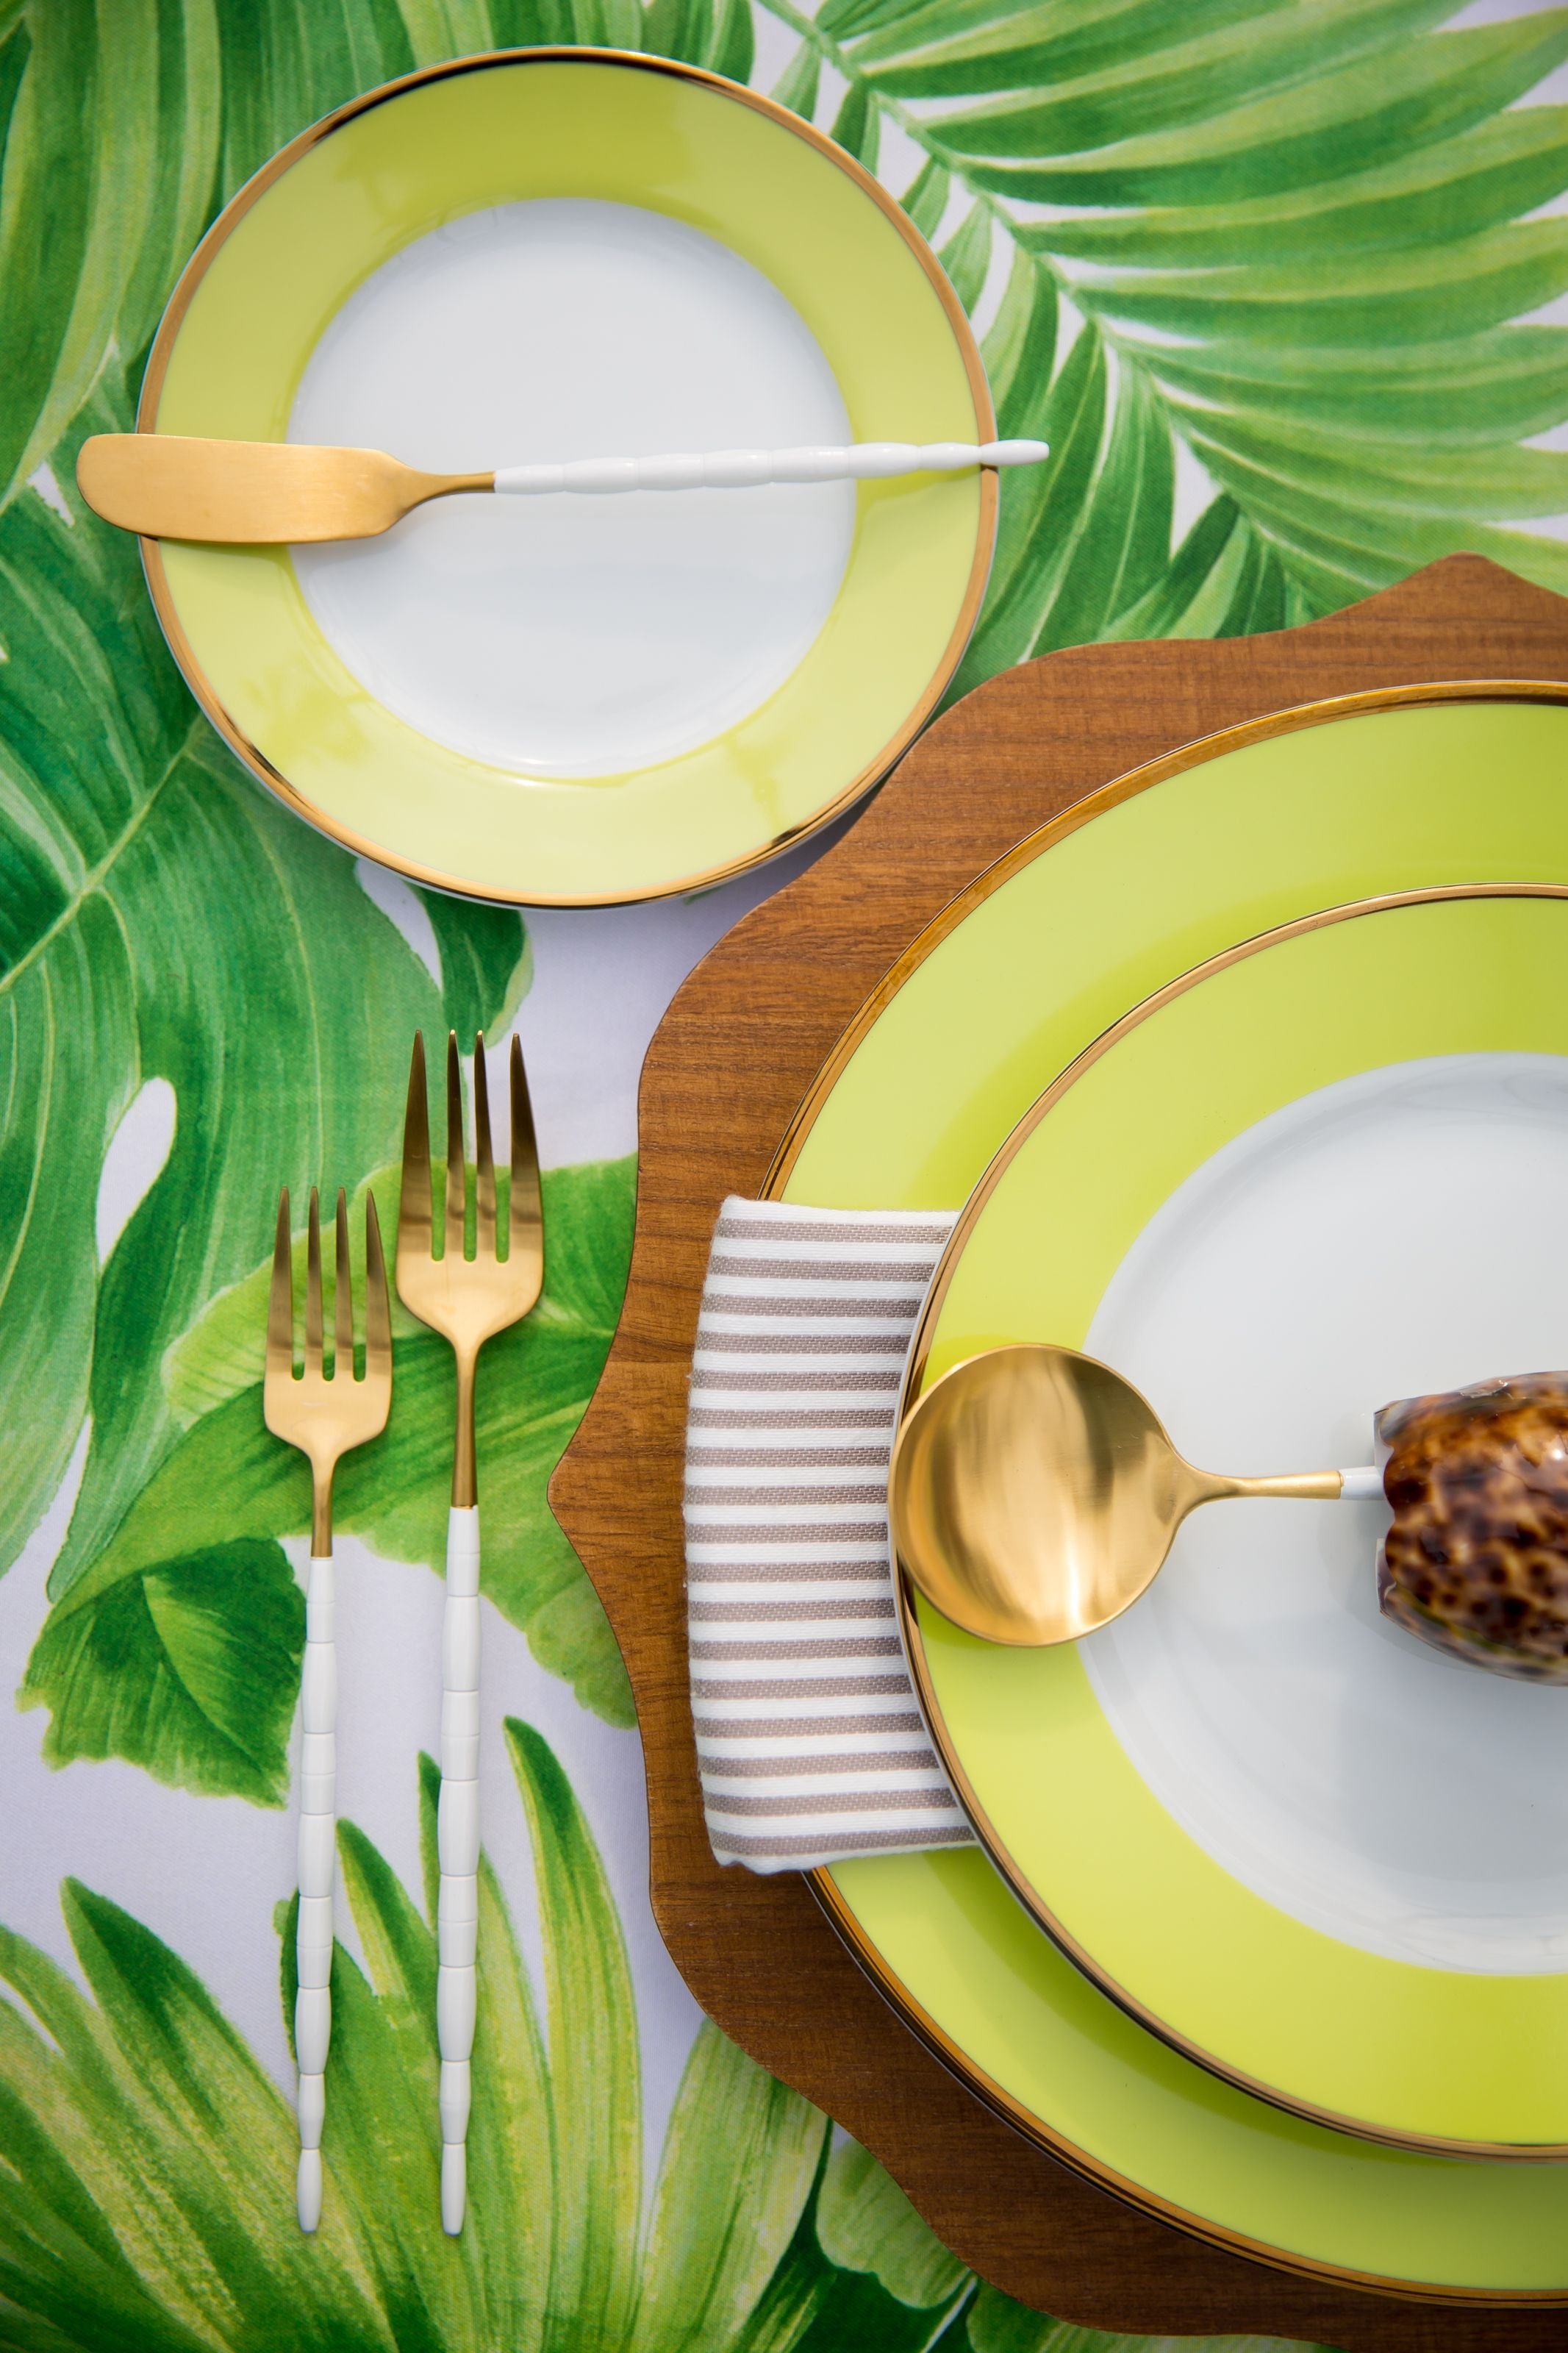 www.santabarbarawedding.com | Bright Event Rentals | Vanity Portrait Studio | Place Setting with Yellow and White Plates and White and Gold Flatware on a Tablecloth of Green Leaves